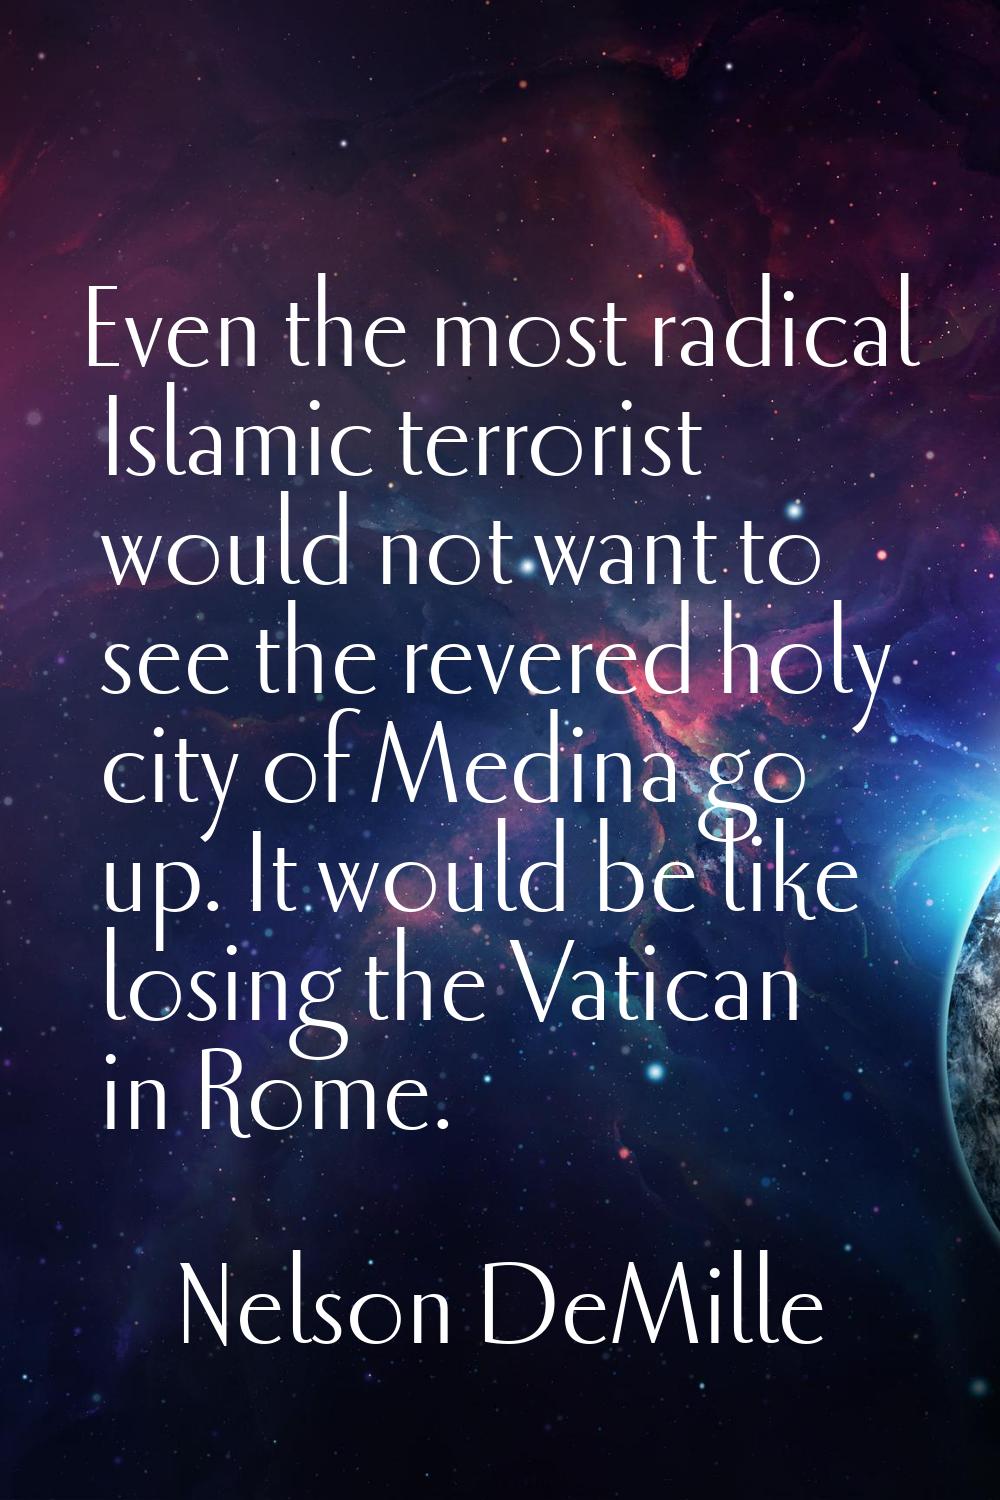 Even the most radical Islamic terrorist would not want to see the revered holy city of Medina go up